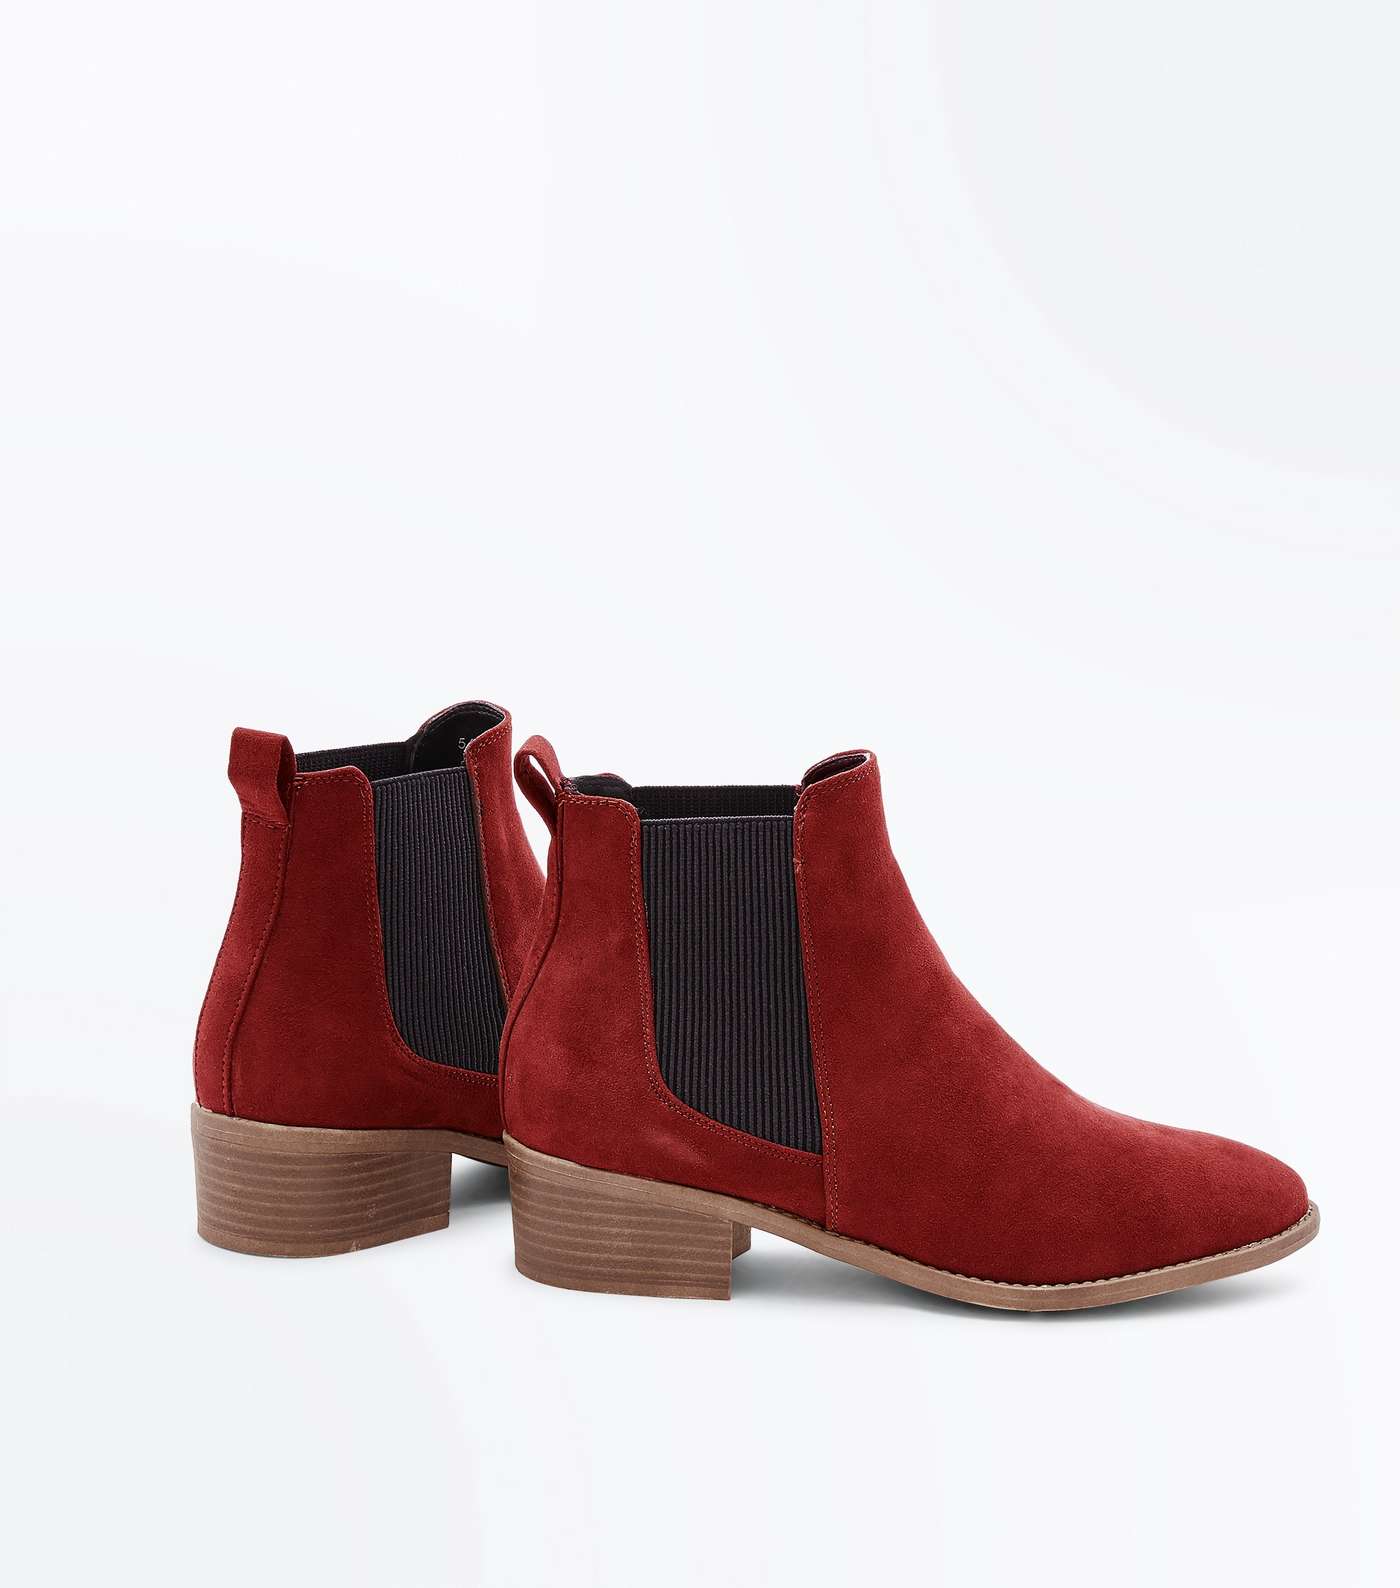 Girls Rust Suedette Chelsea Boots Image 4